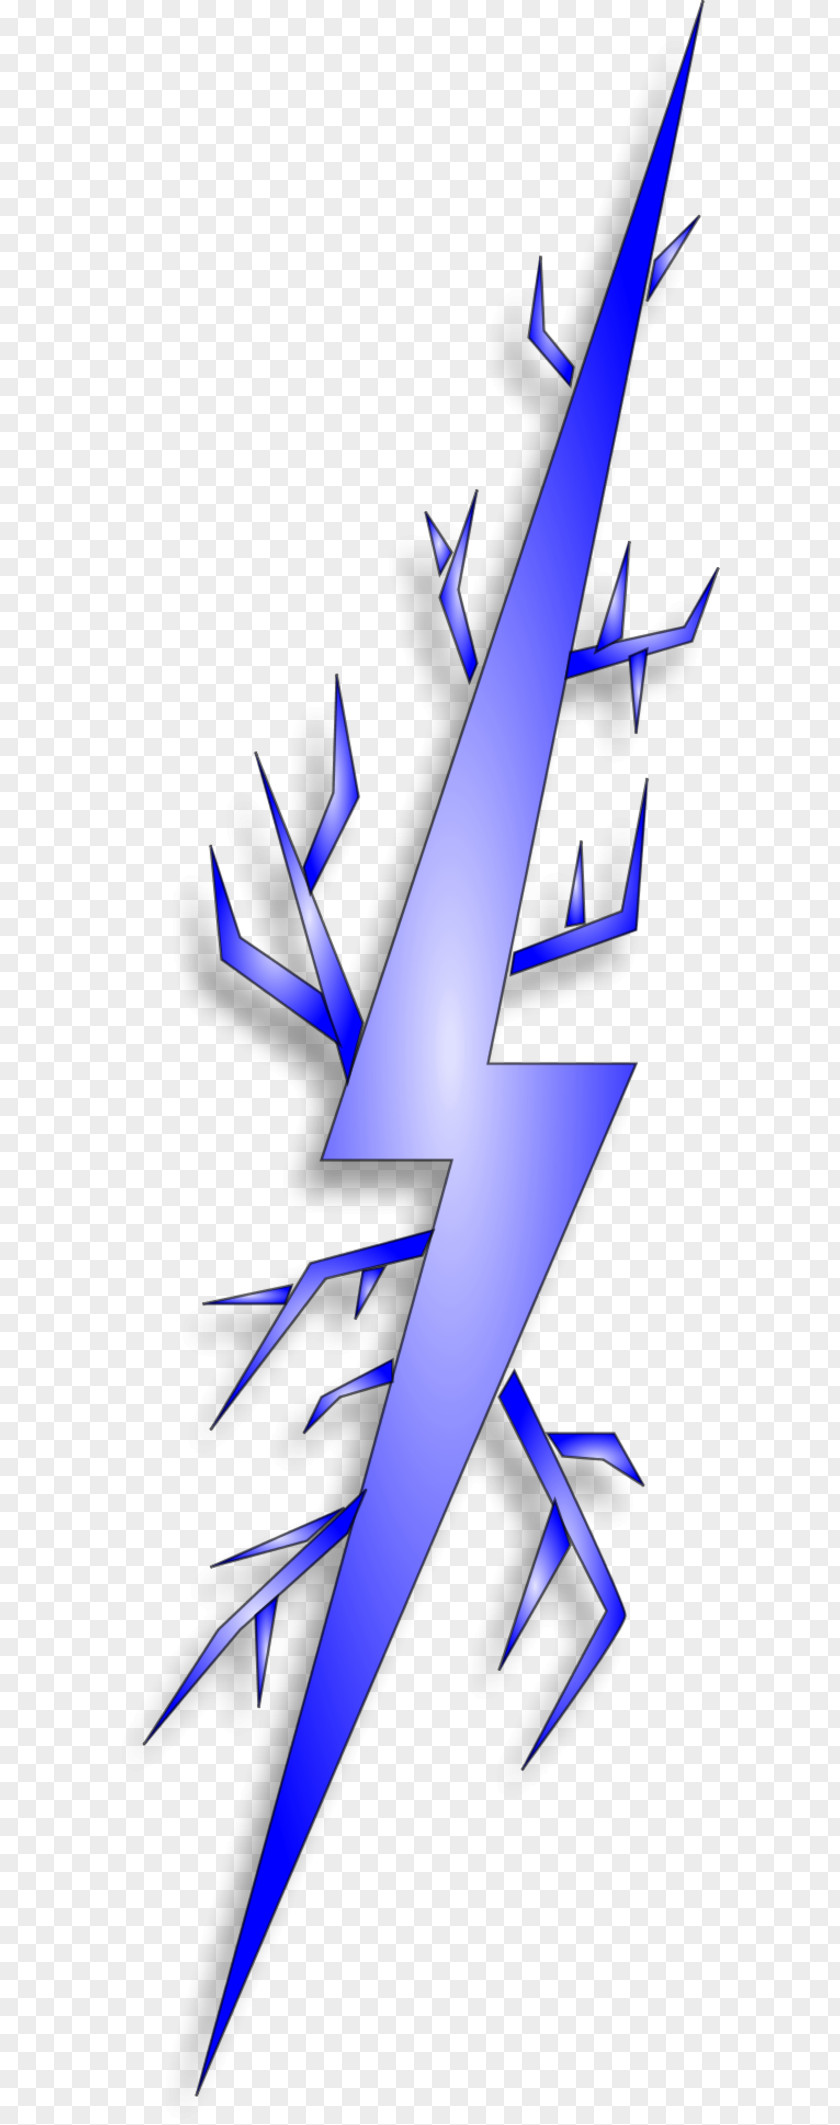 Lighning Cliparts Electric Spark Clip Art PNG